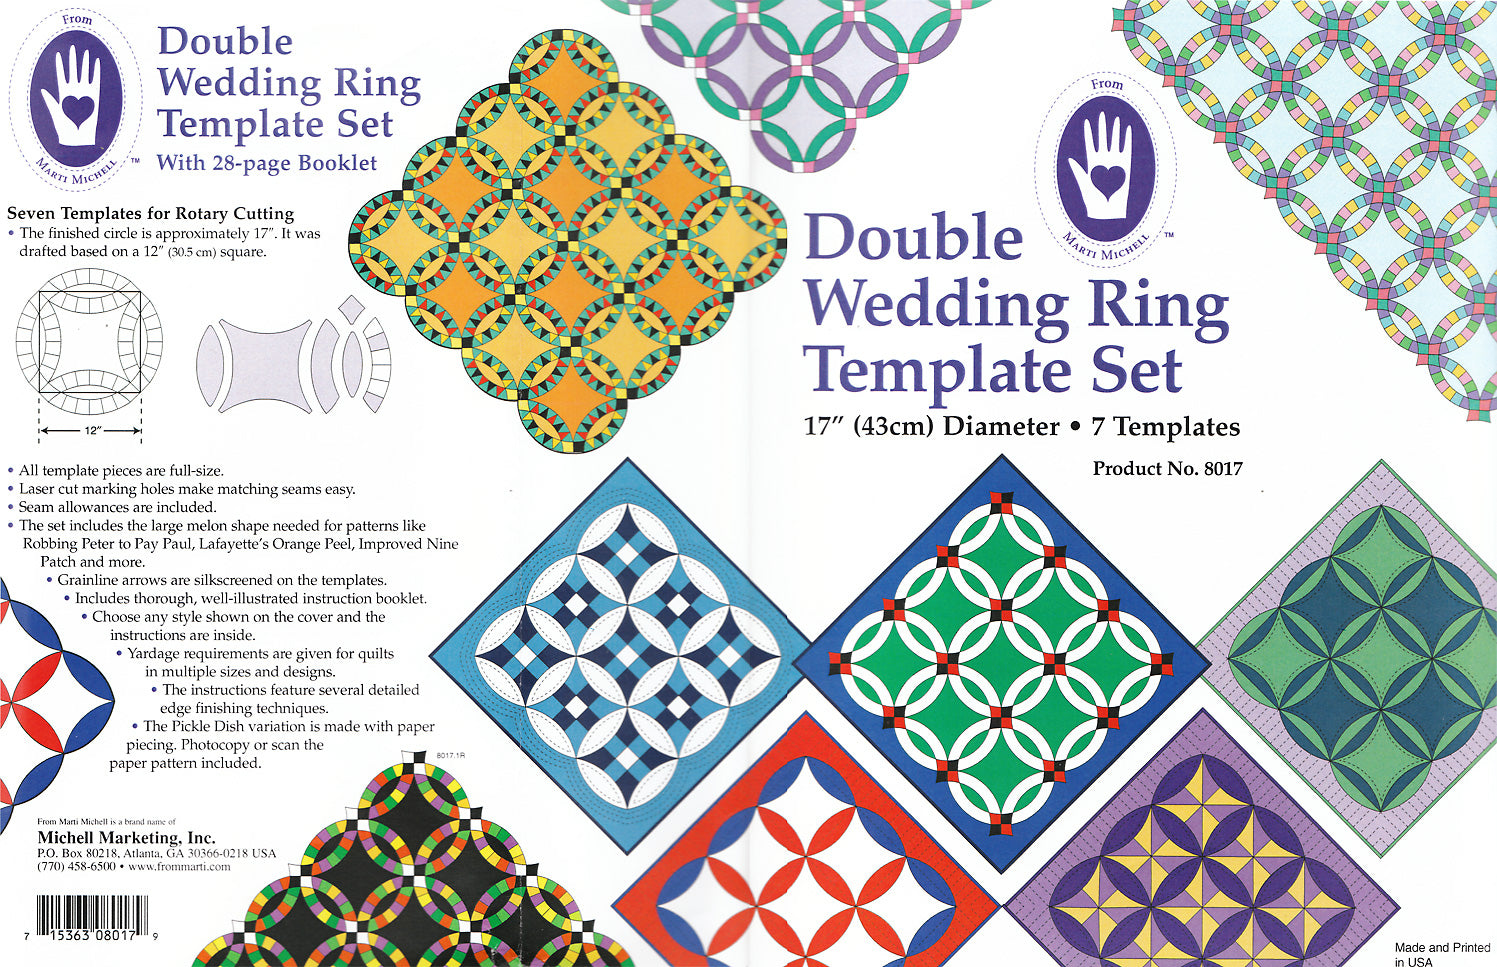 Double Wedding Ring 17-Inch Diameter Set of 7 Templates From Marti Michell